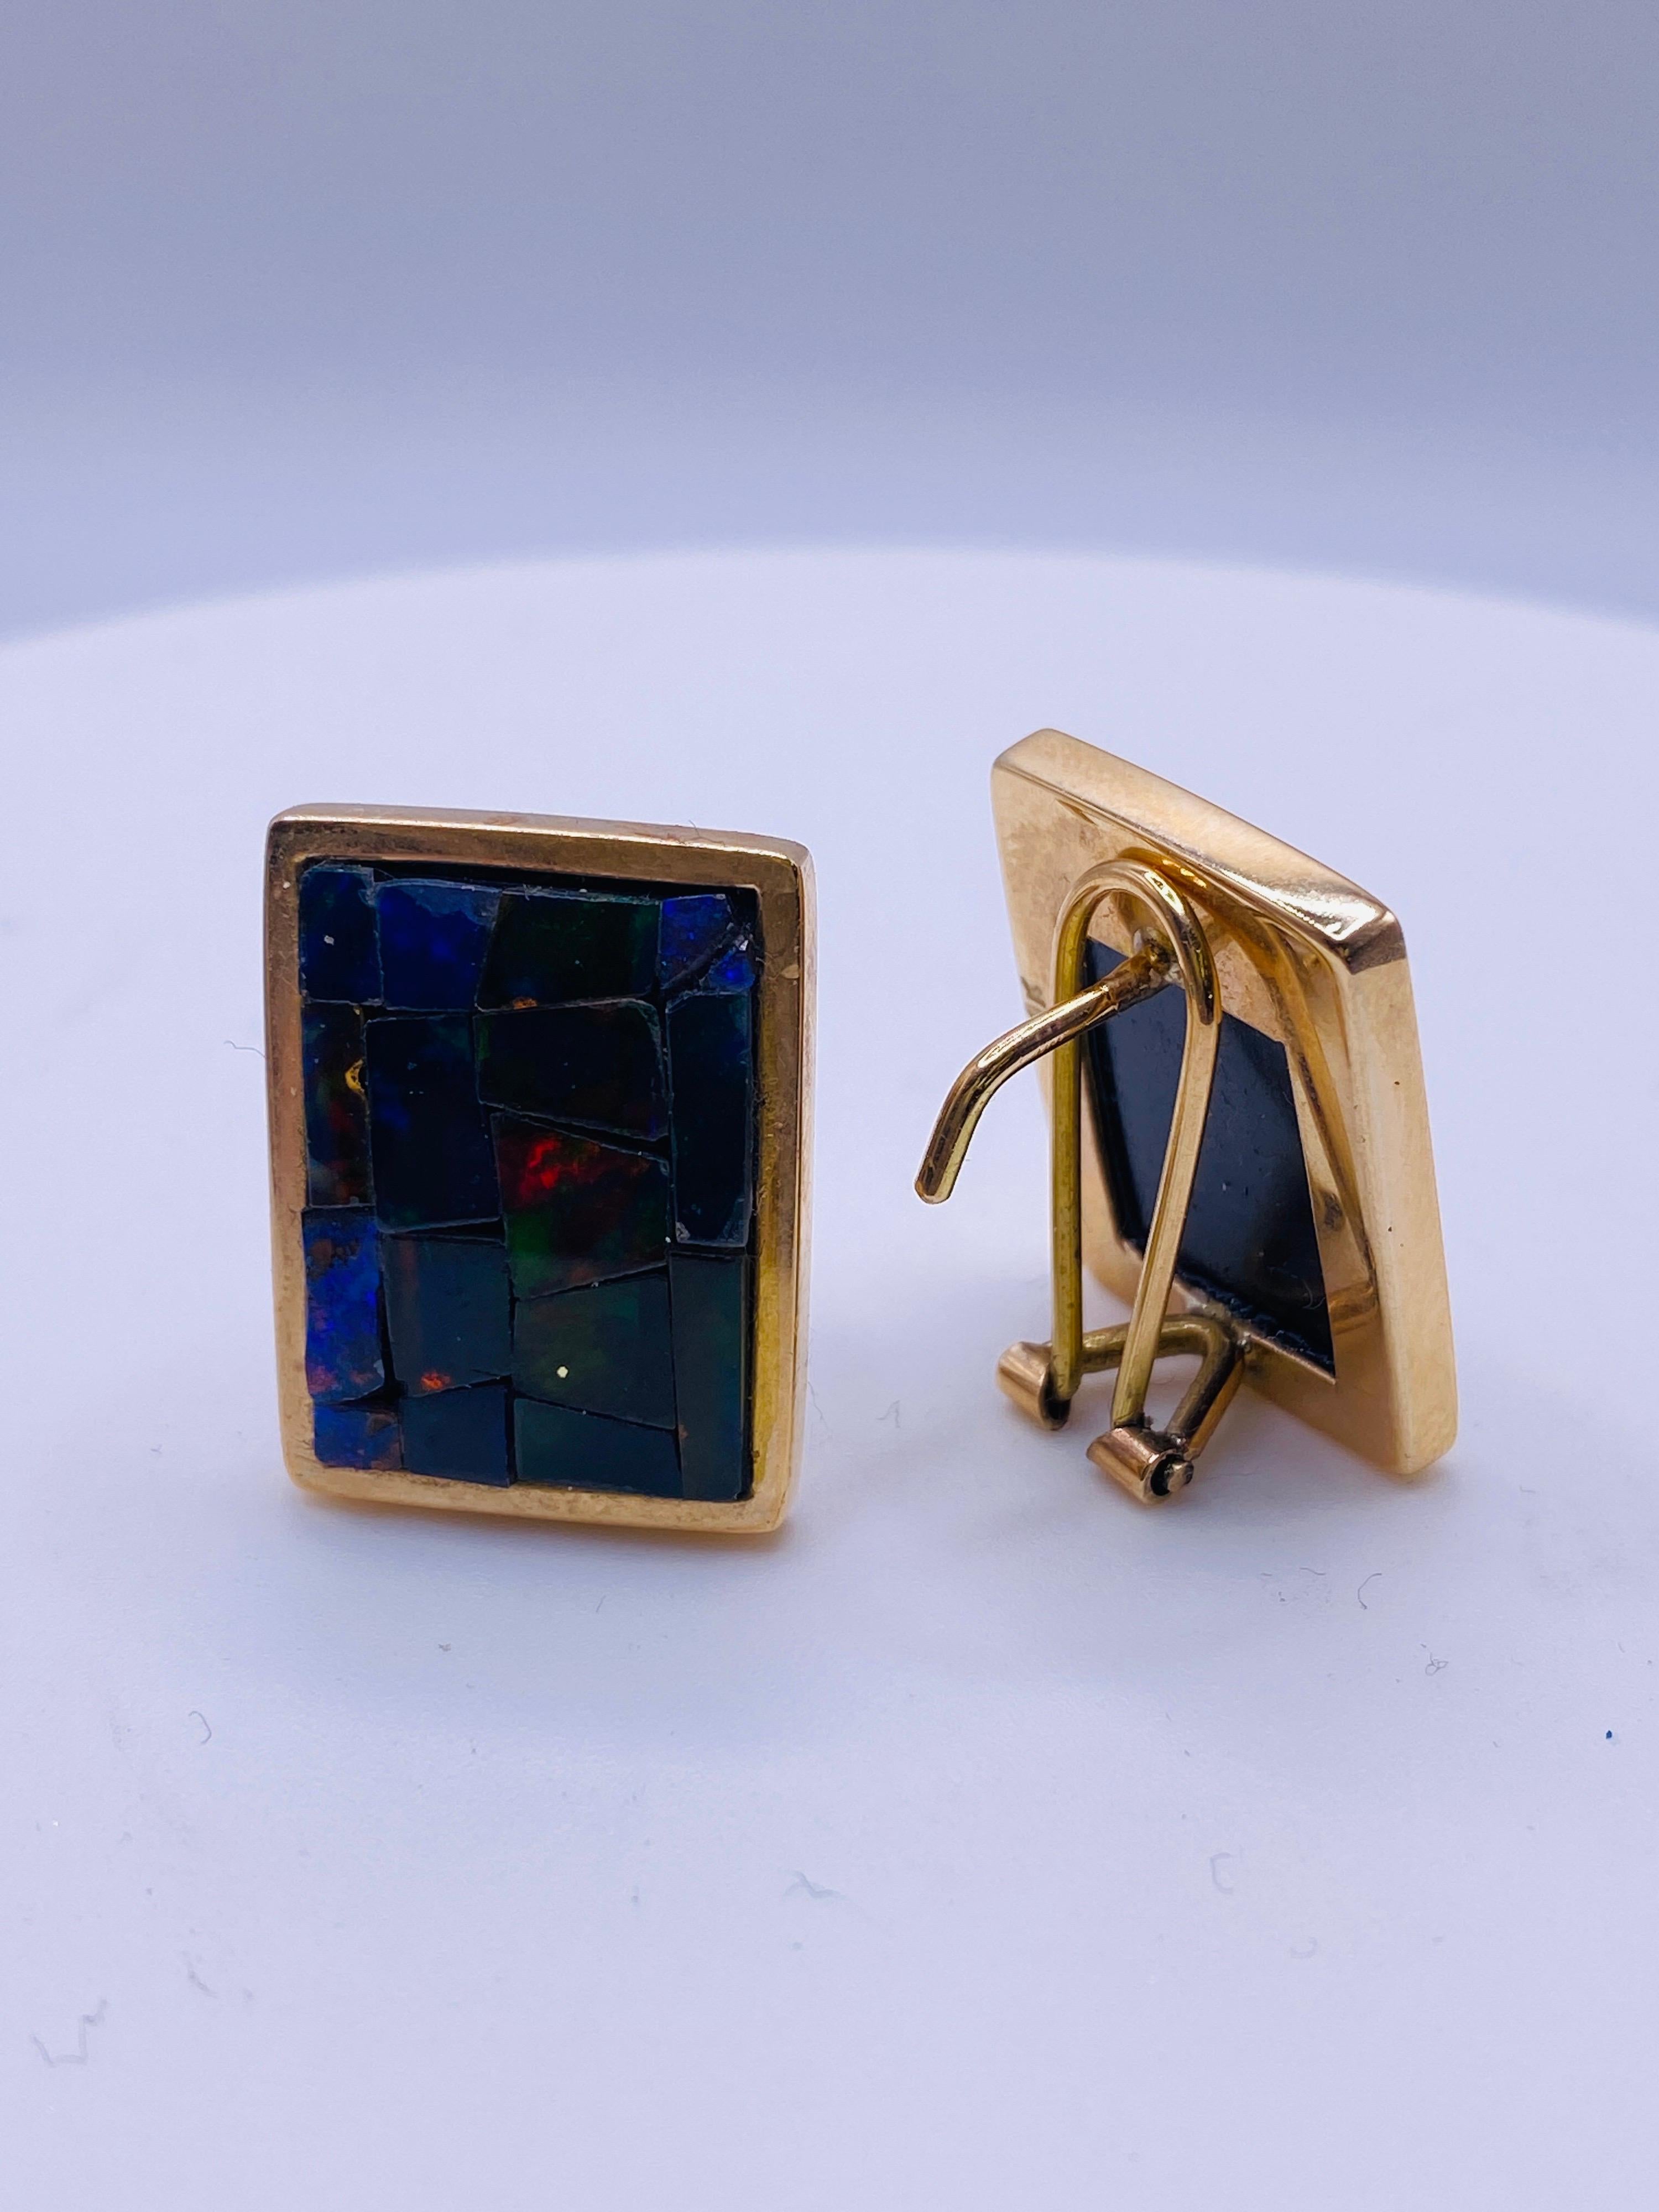 14k yellow gold inlay mosaic opal earrings with omega clip backs. 7.0dwt